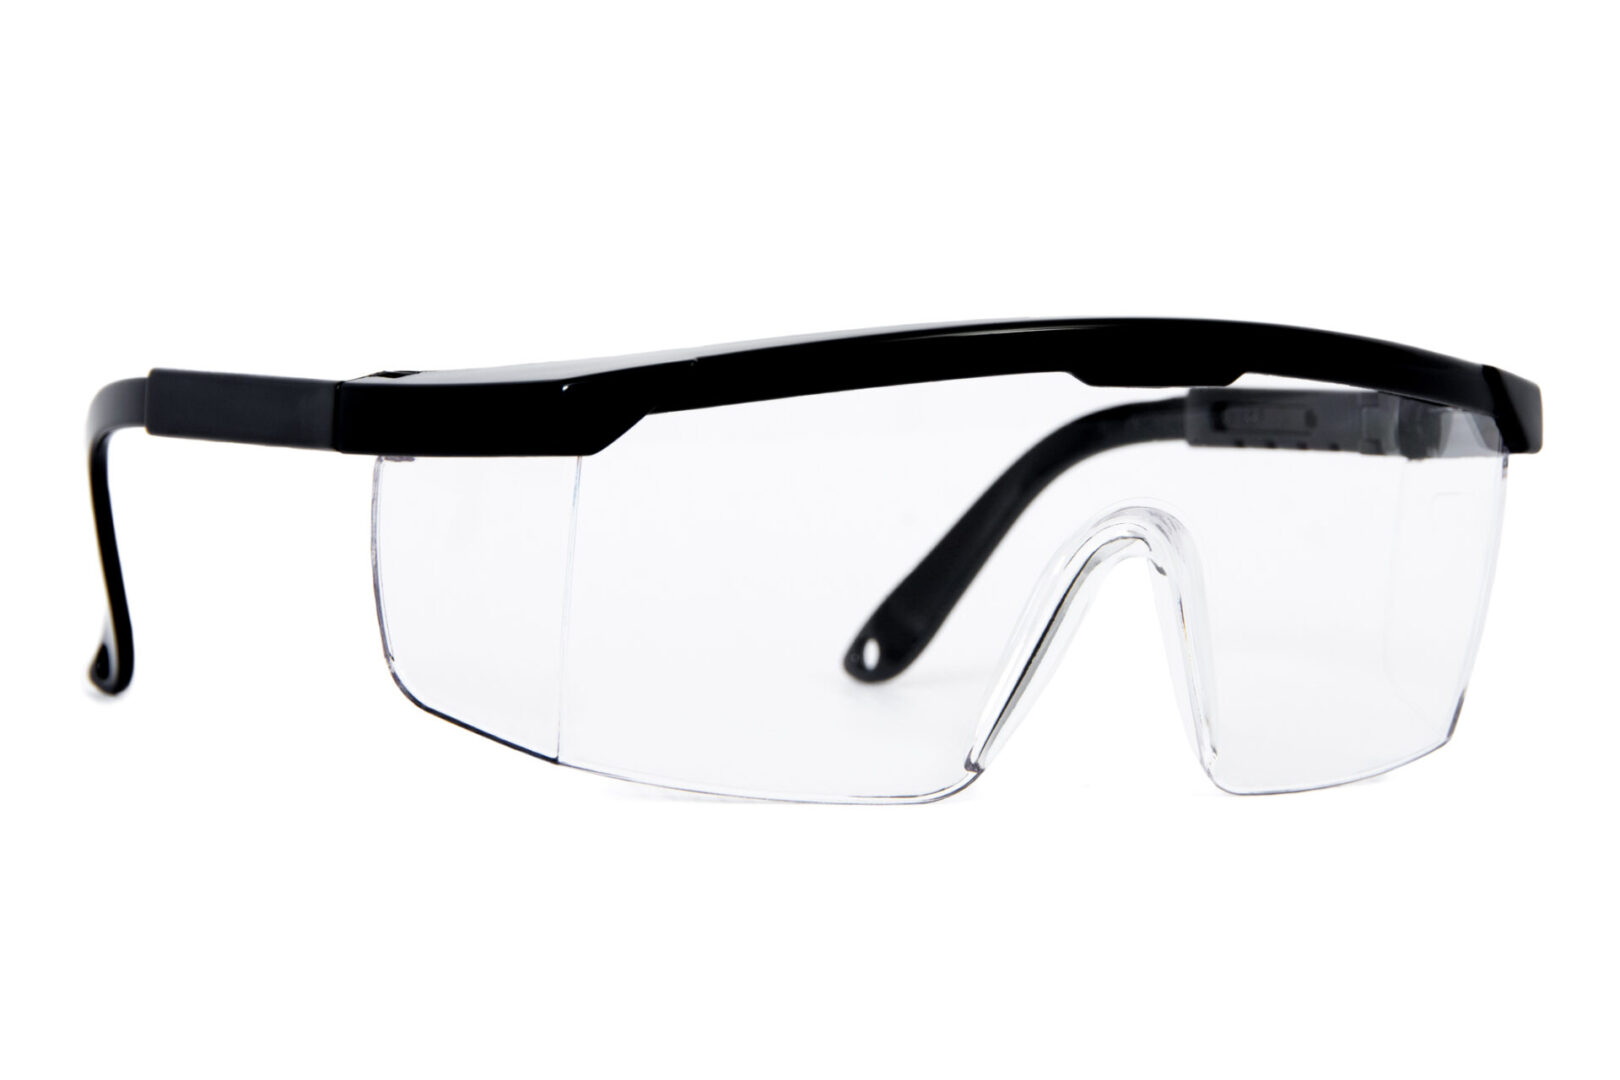 A pair of safety glasses with clear lenses.